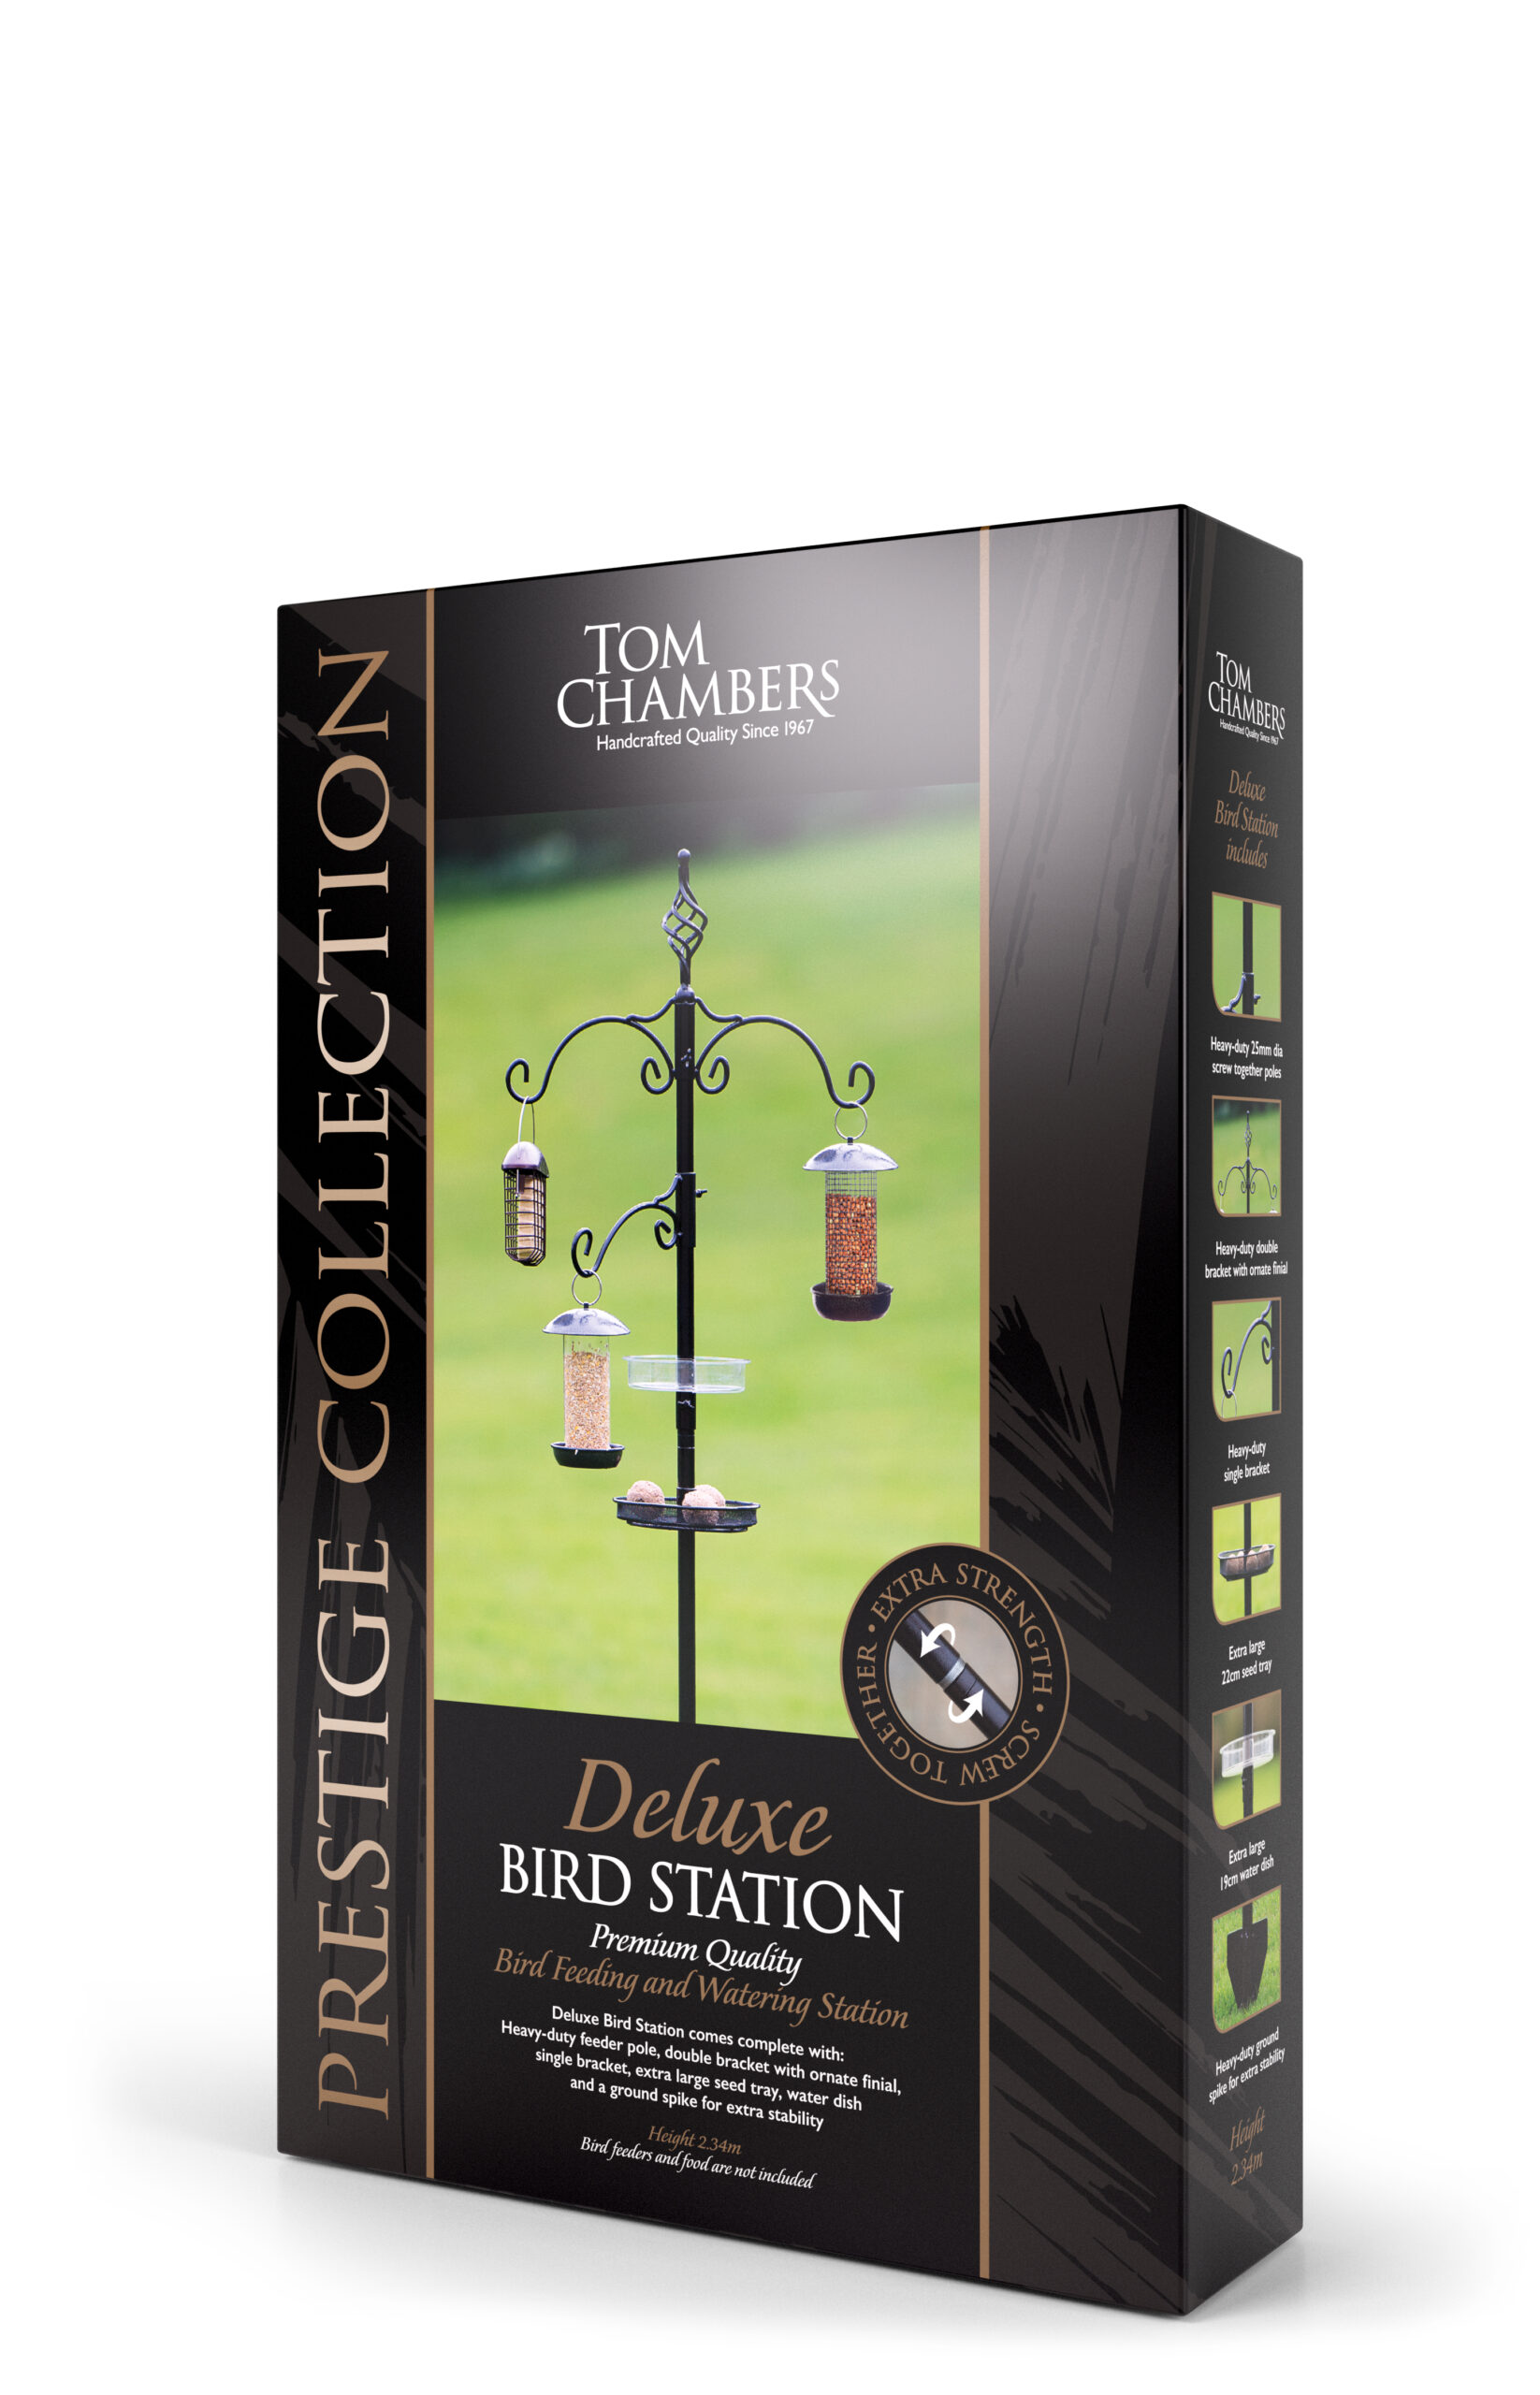 Tom chambers Deluxe Bird Station